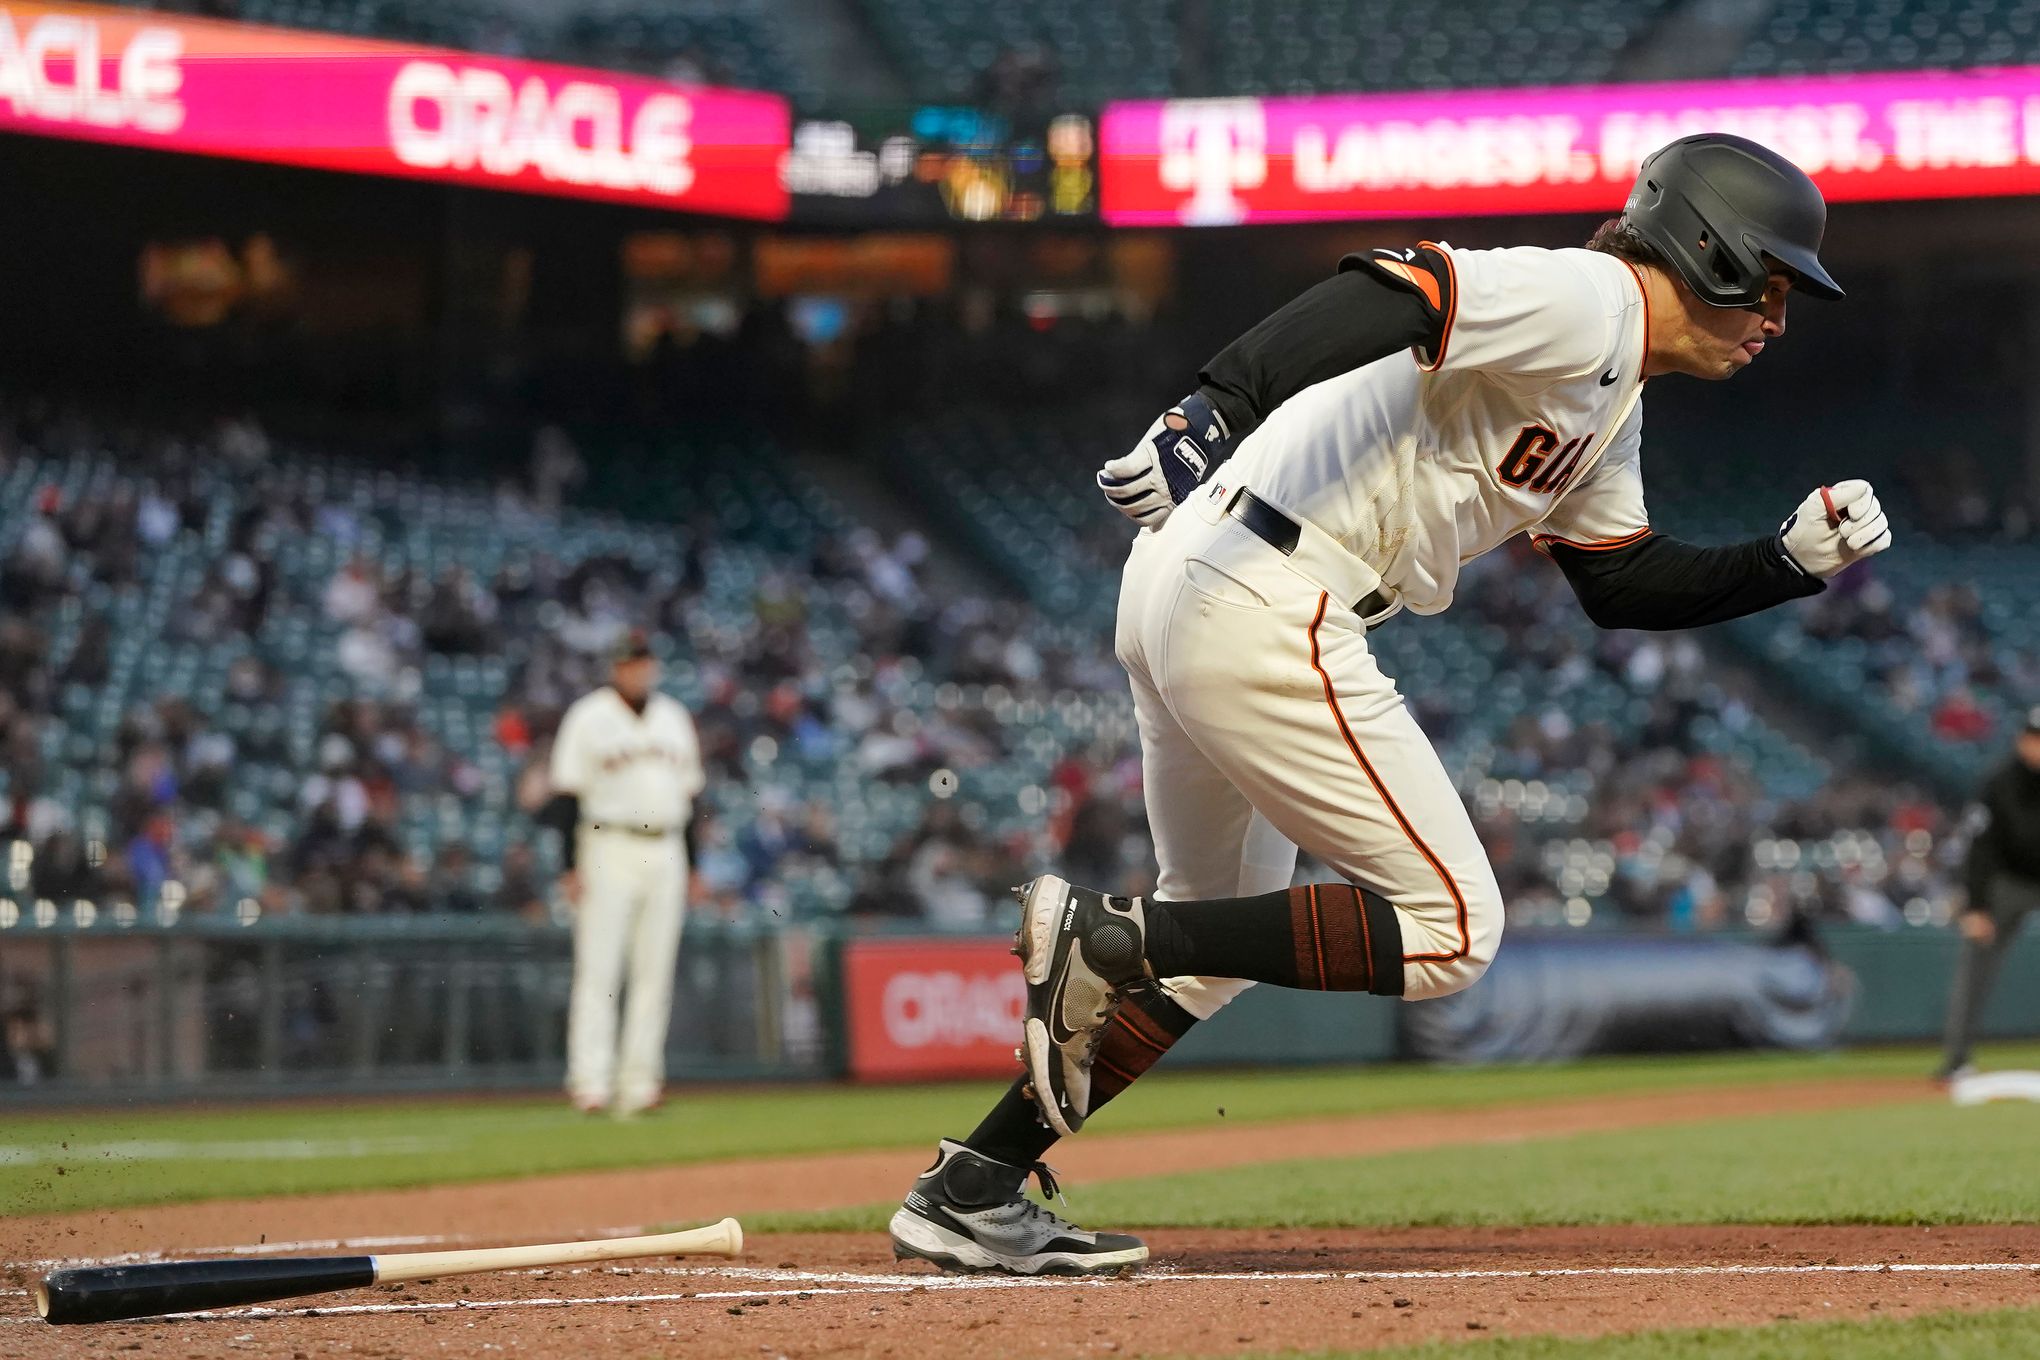 Giants first baseman Brandon Belt back from IL, will be eased back